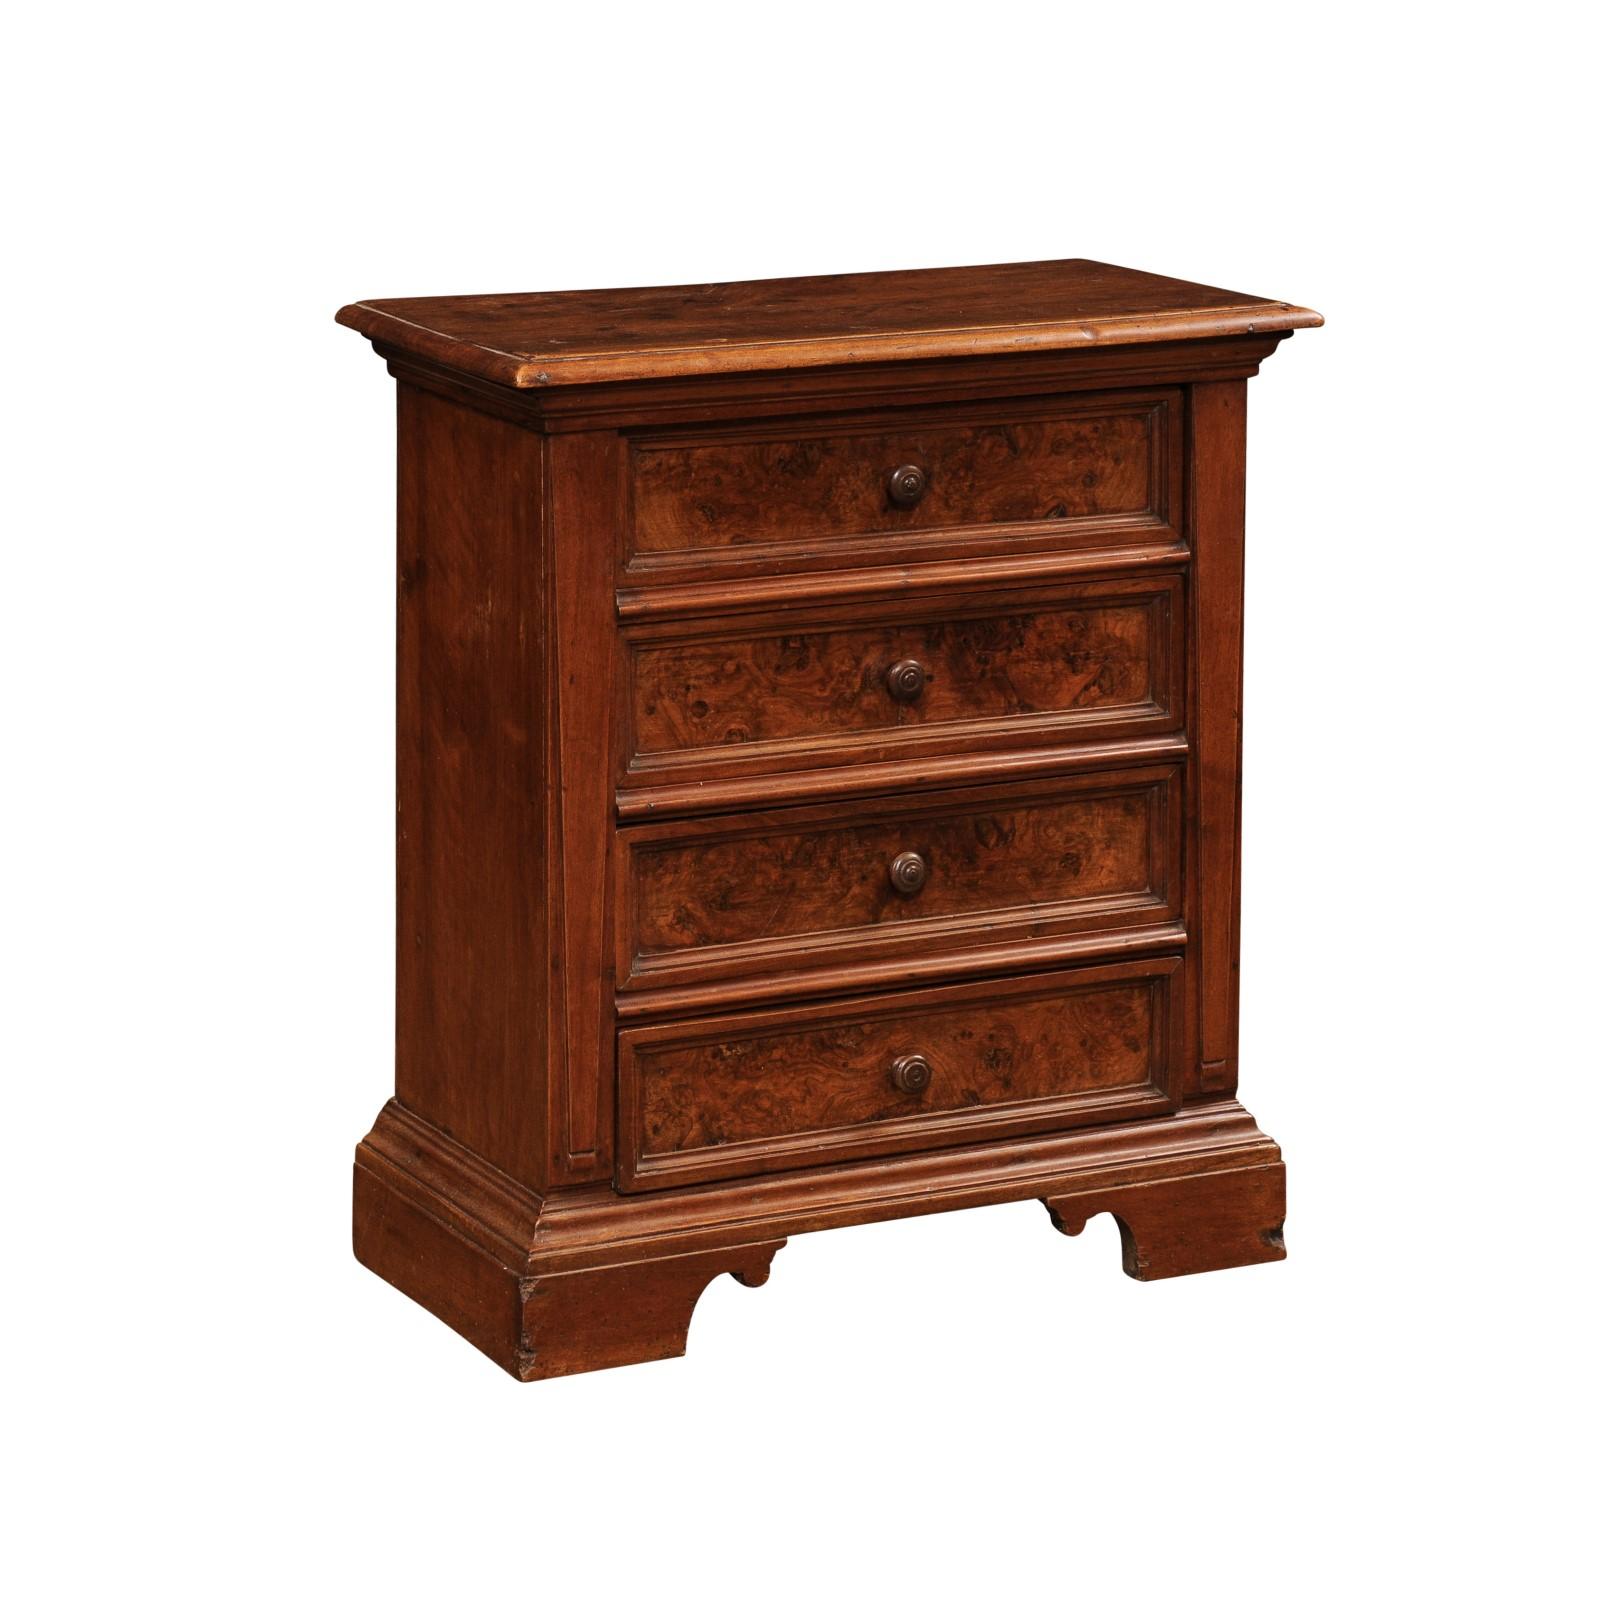 An Italian walnut bedside chest from circa 1840 with burl wood panels, four drawers and carved bracket feet. Immerse yourself in the grandeur of 19th-century Italian craftsmanship with this captivating walnut bedside chest from circa 1840. This